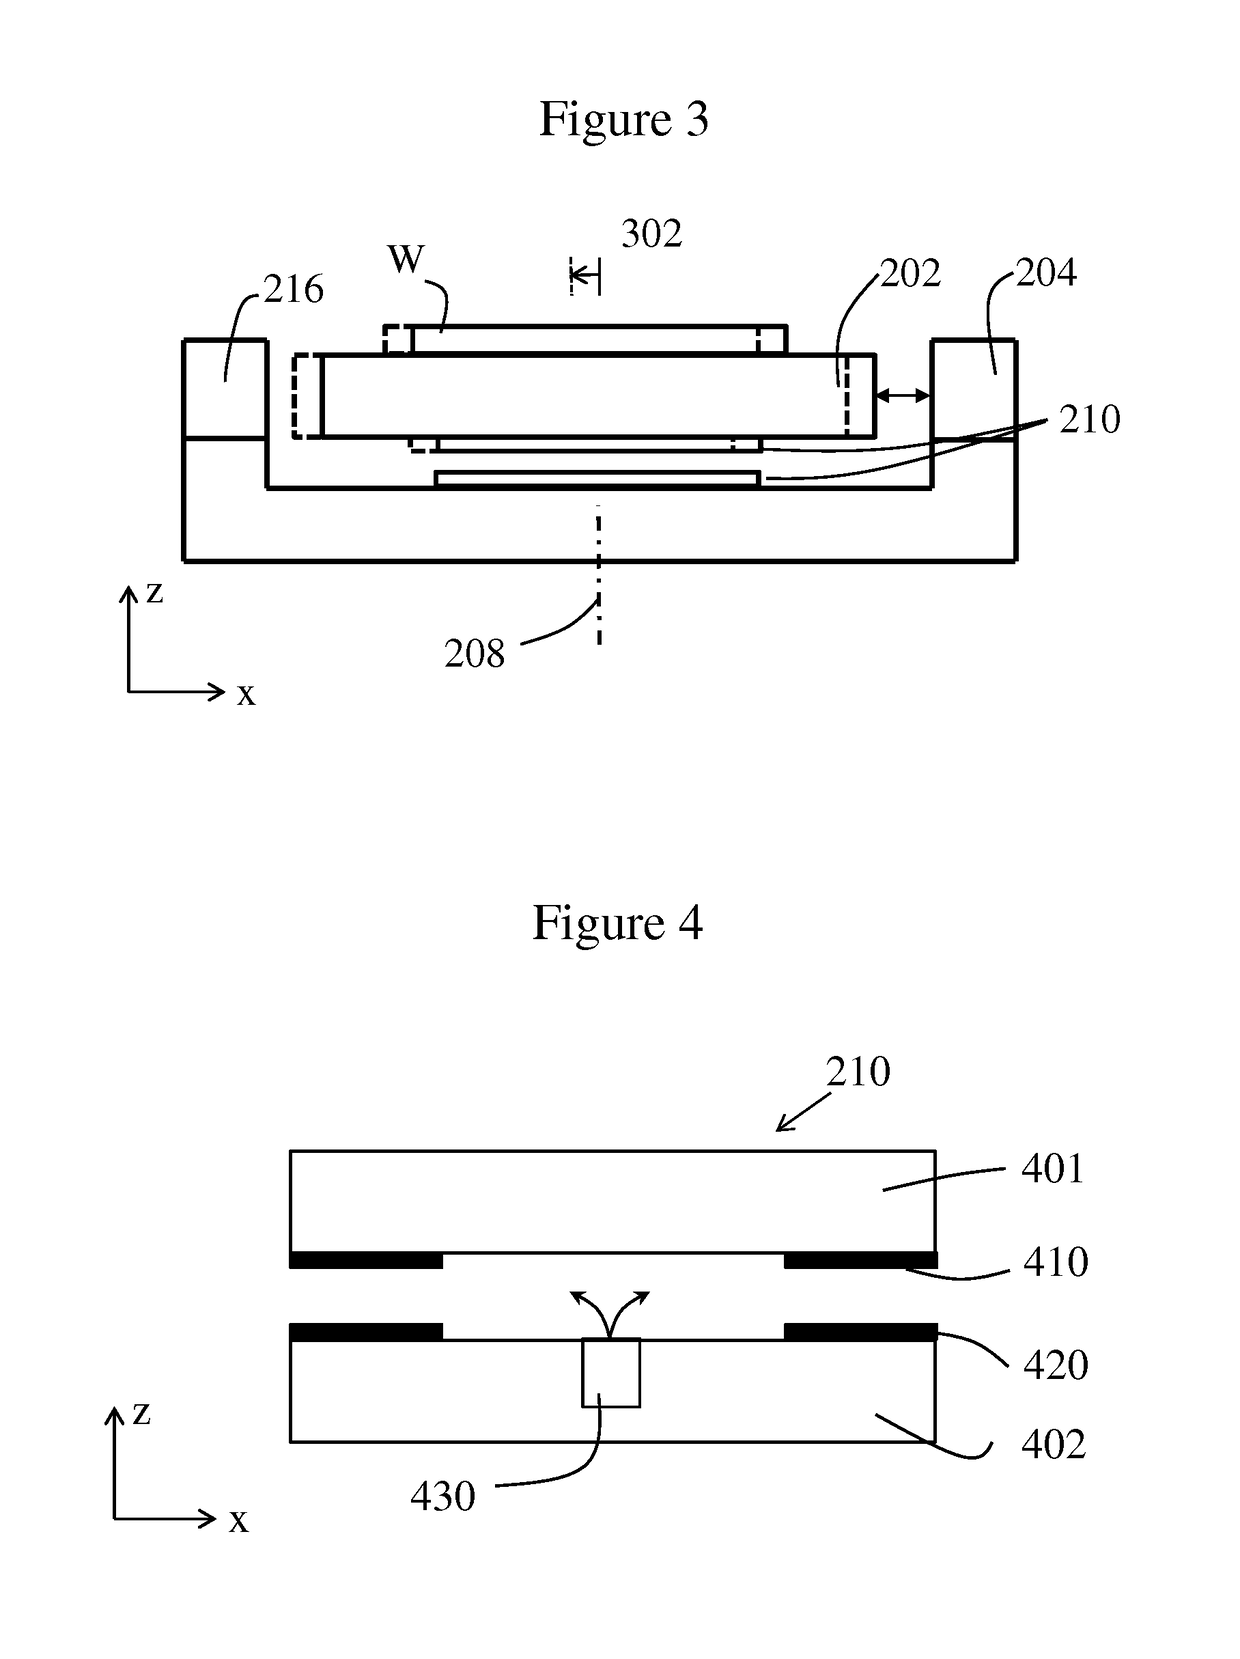 Substrate handling system and lithographic apparatus